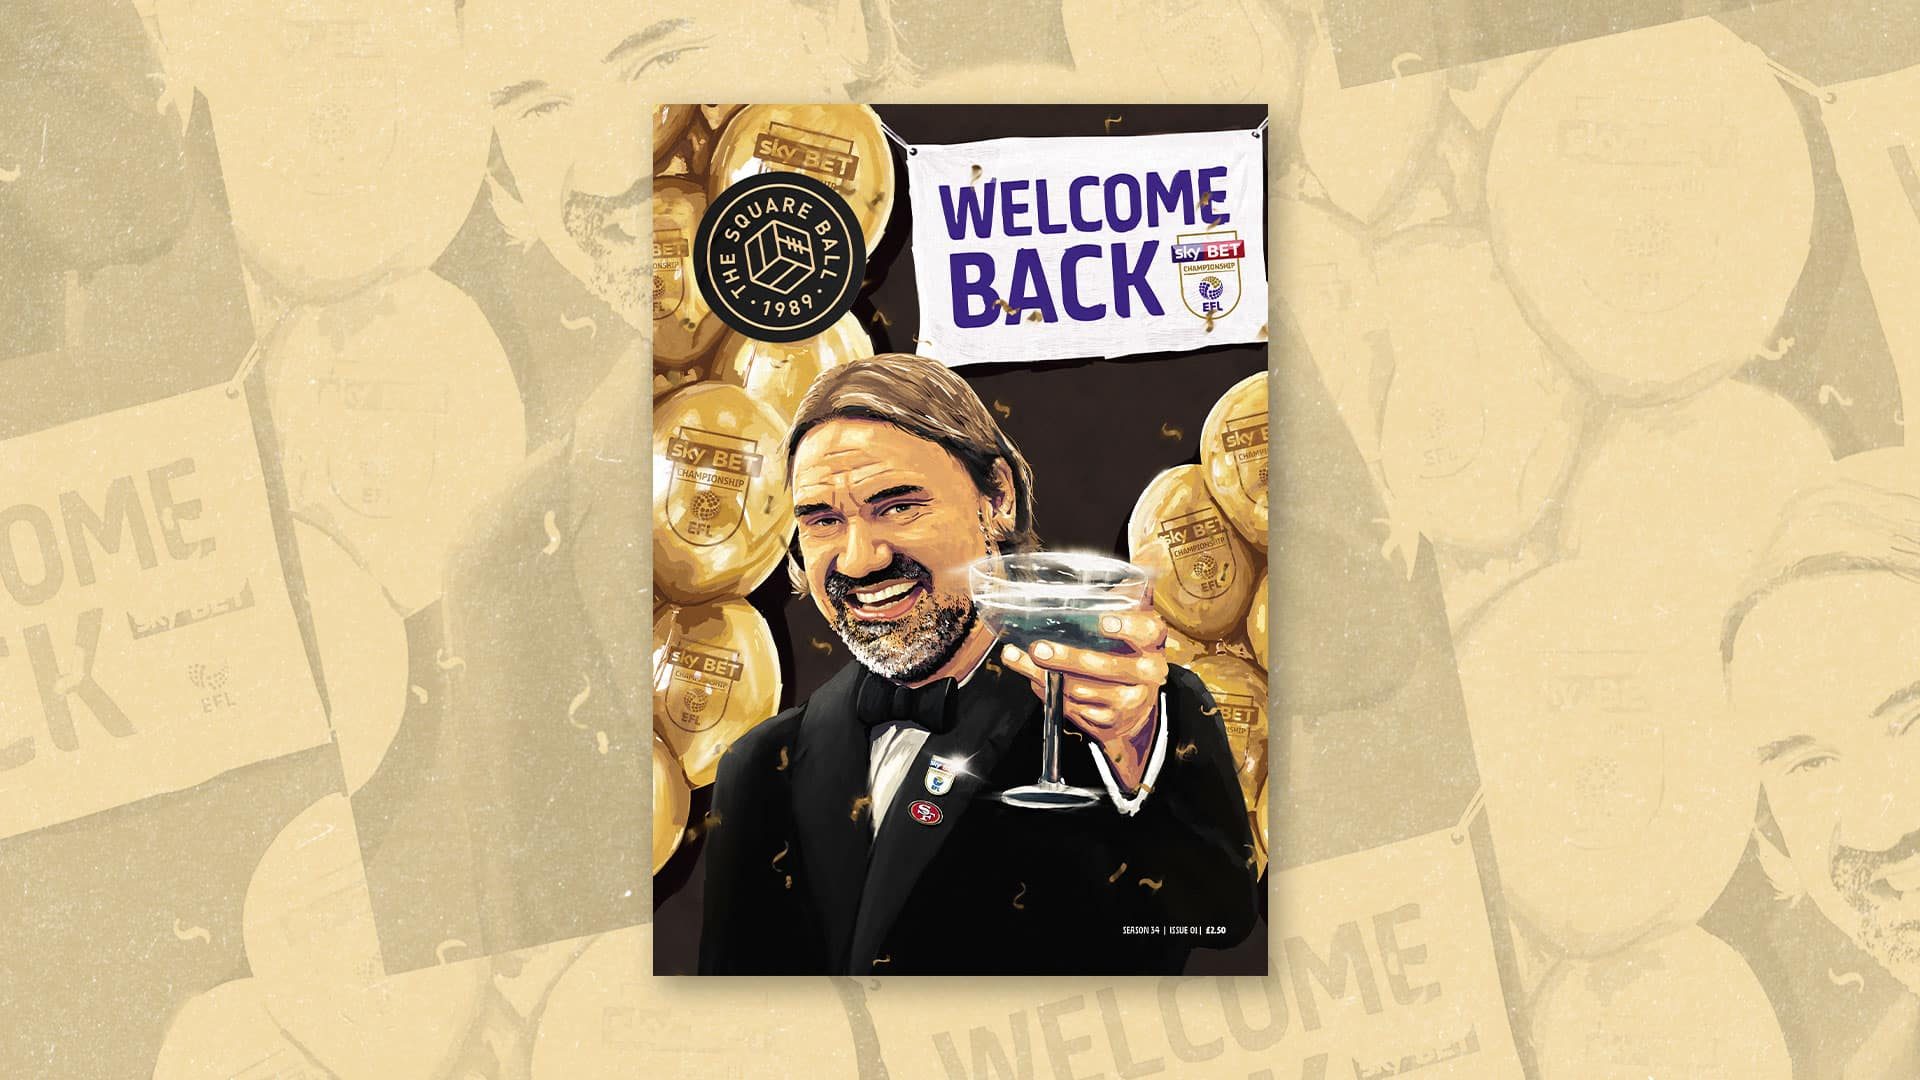 The front cover of TSB 23-24 issue 01, with artwork by Lee Shackleton showing Daniel Farke raising a champagne glass to the viewer, with a banner reading 'Welcome back' and balloons featuring the Championship logo